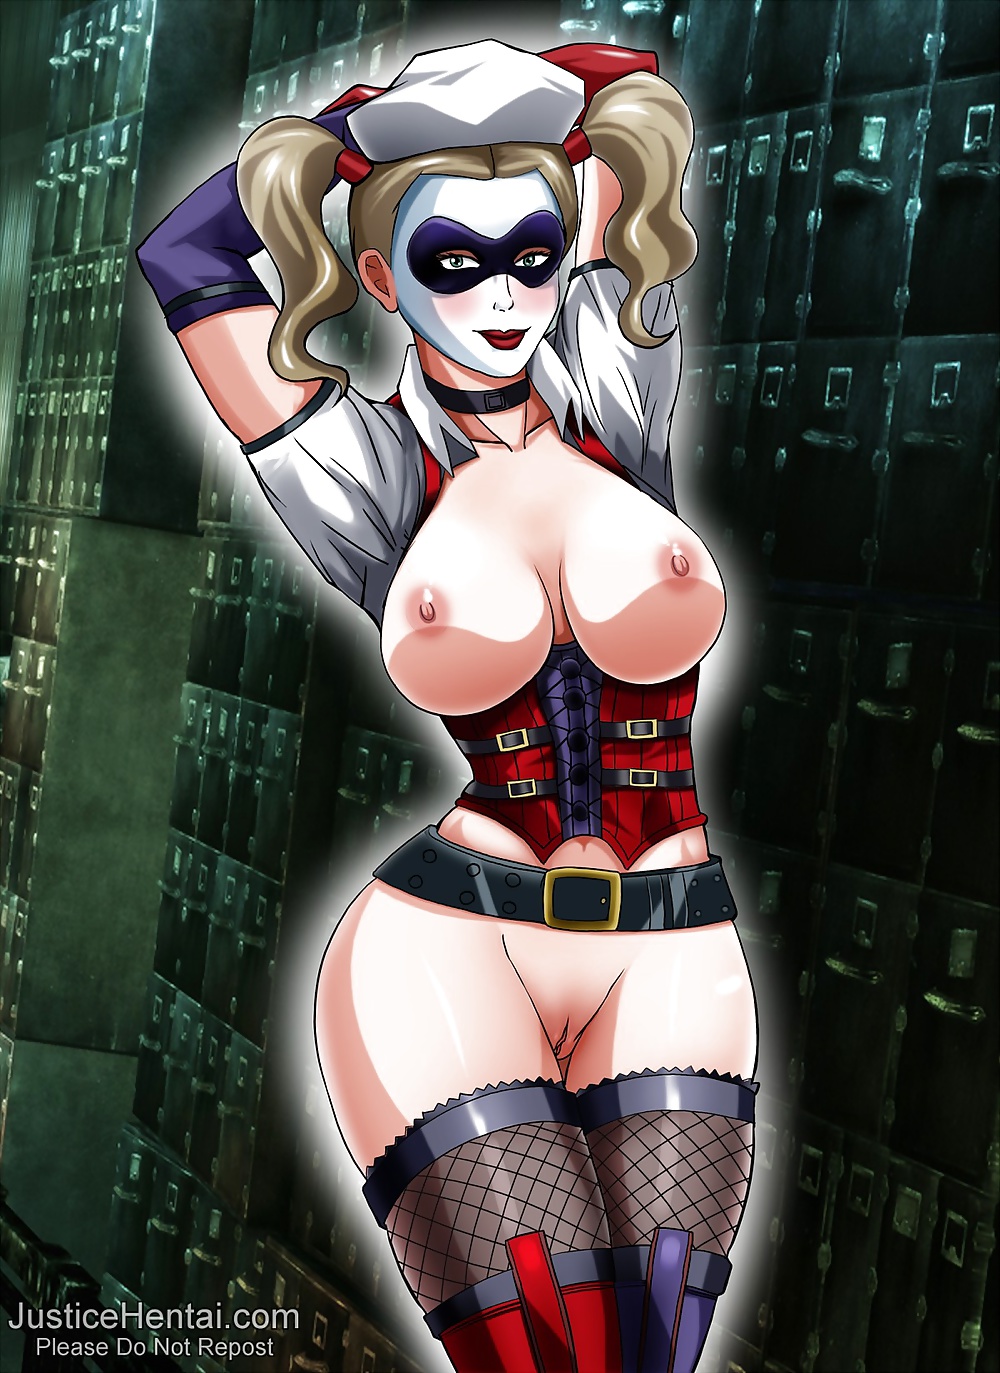 Nude Harley Quinn Pictures.